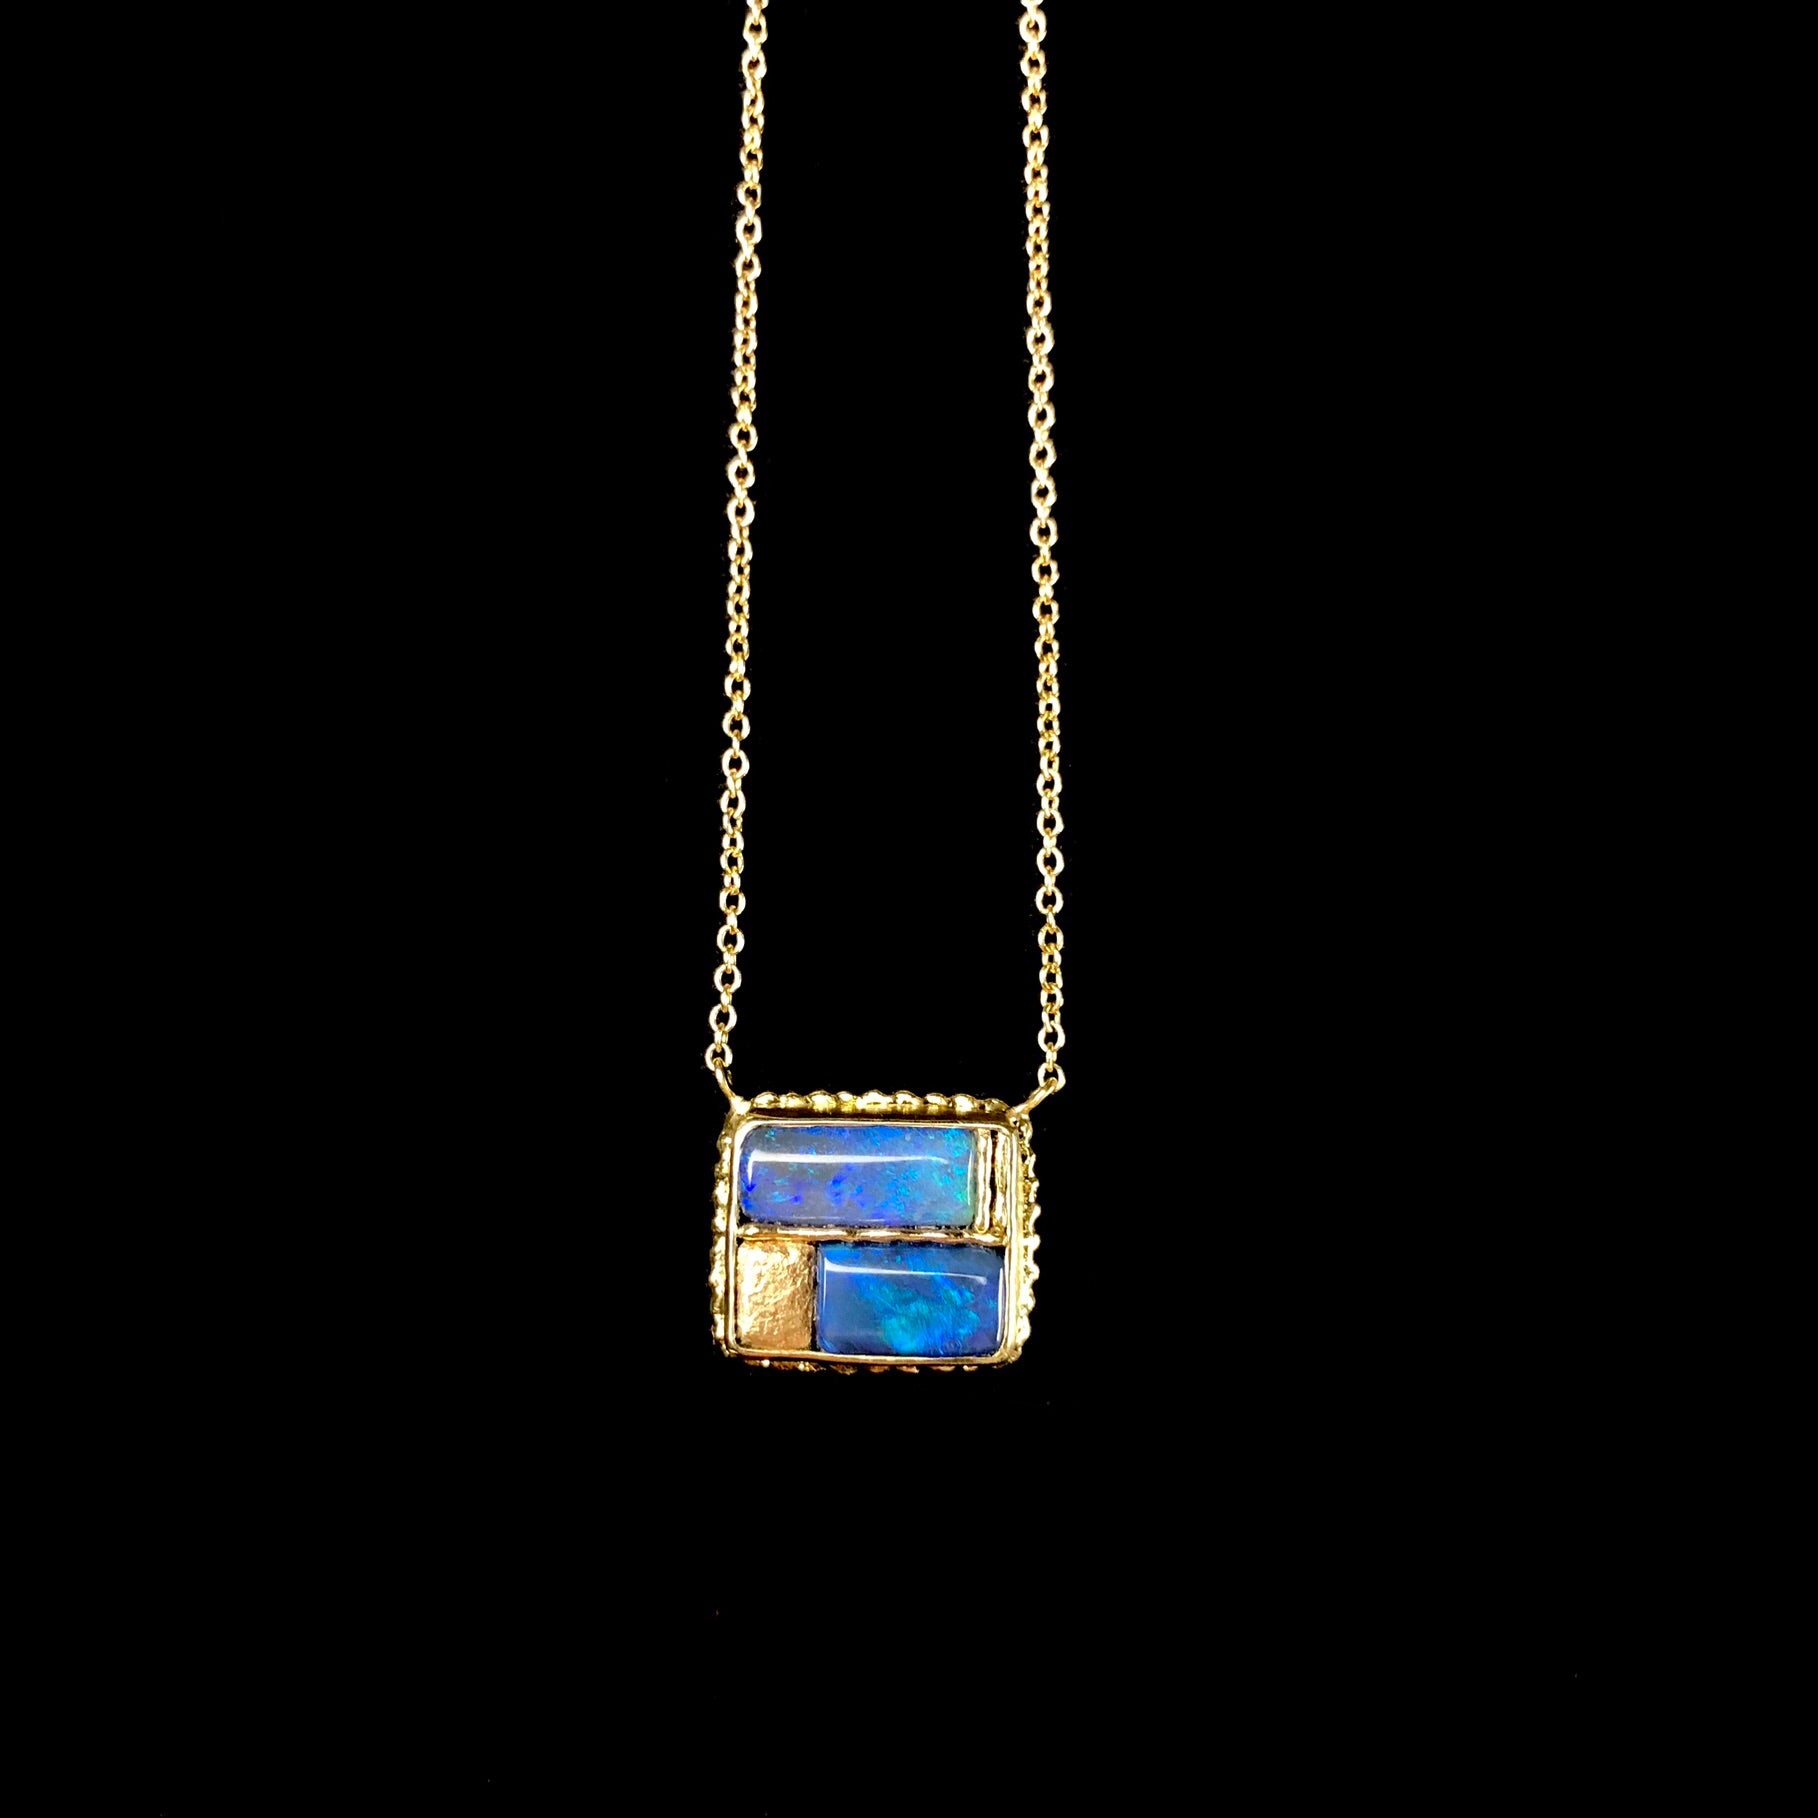 Blue and green iridescent opal stones set in gold on chain 